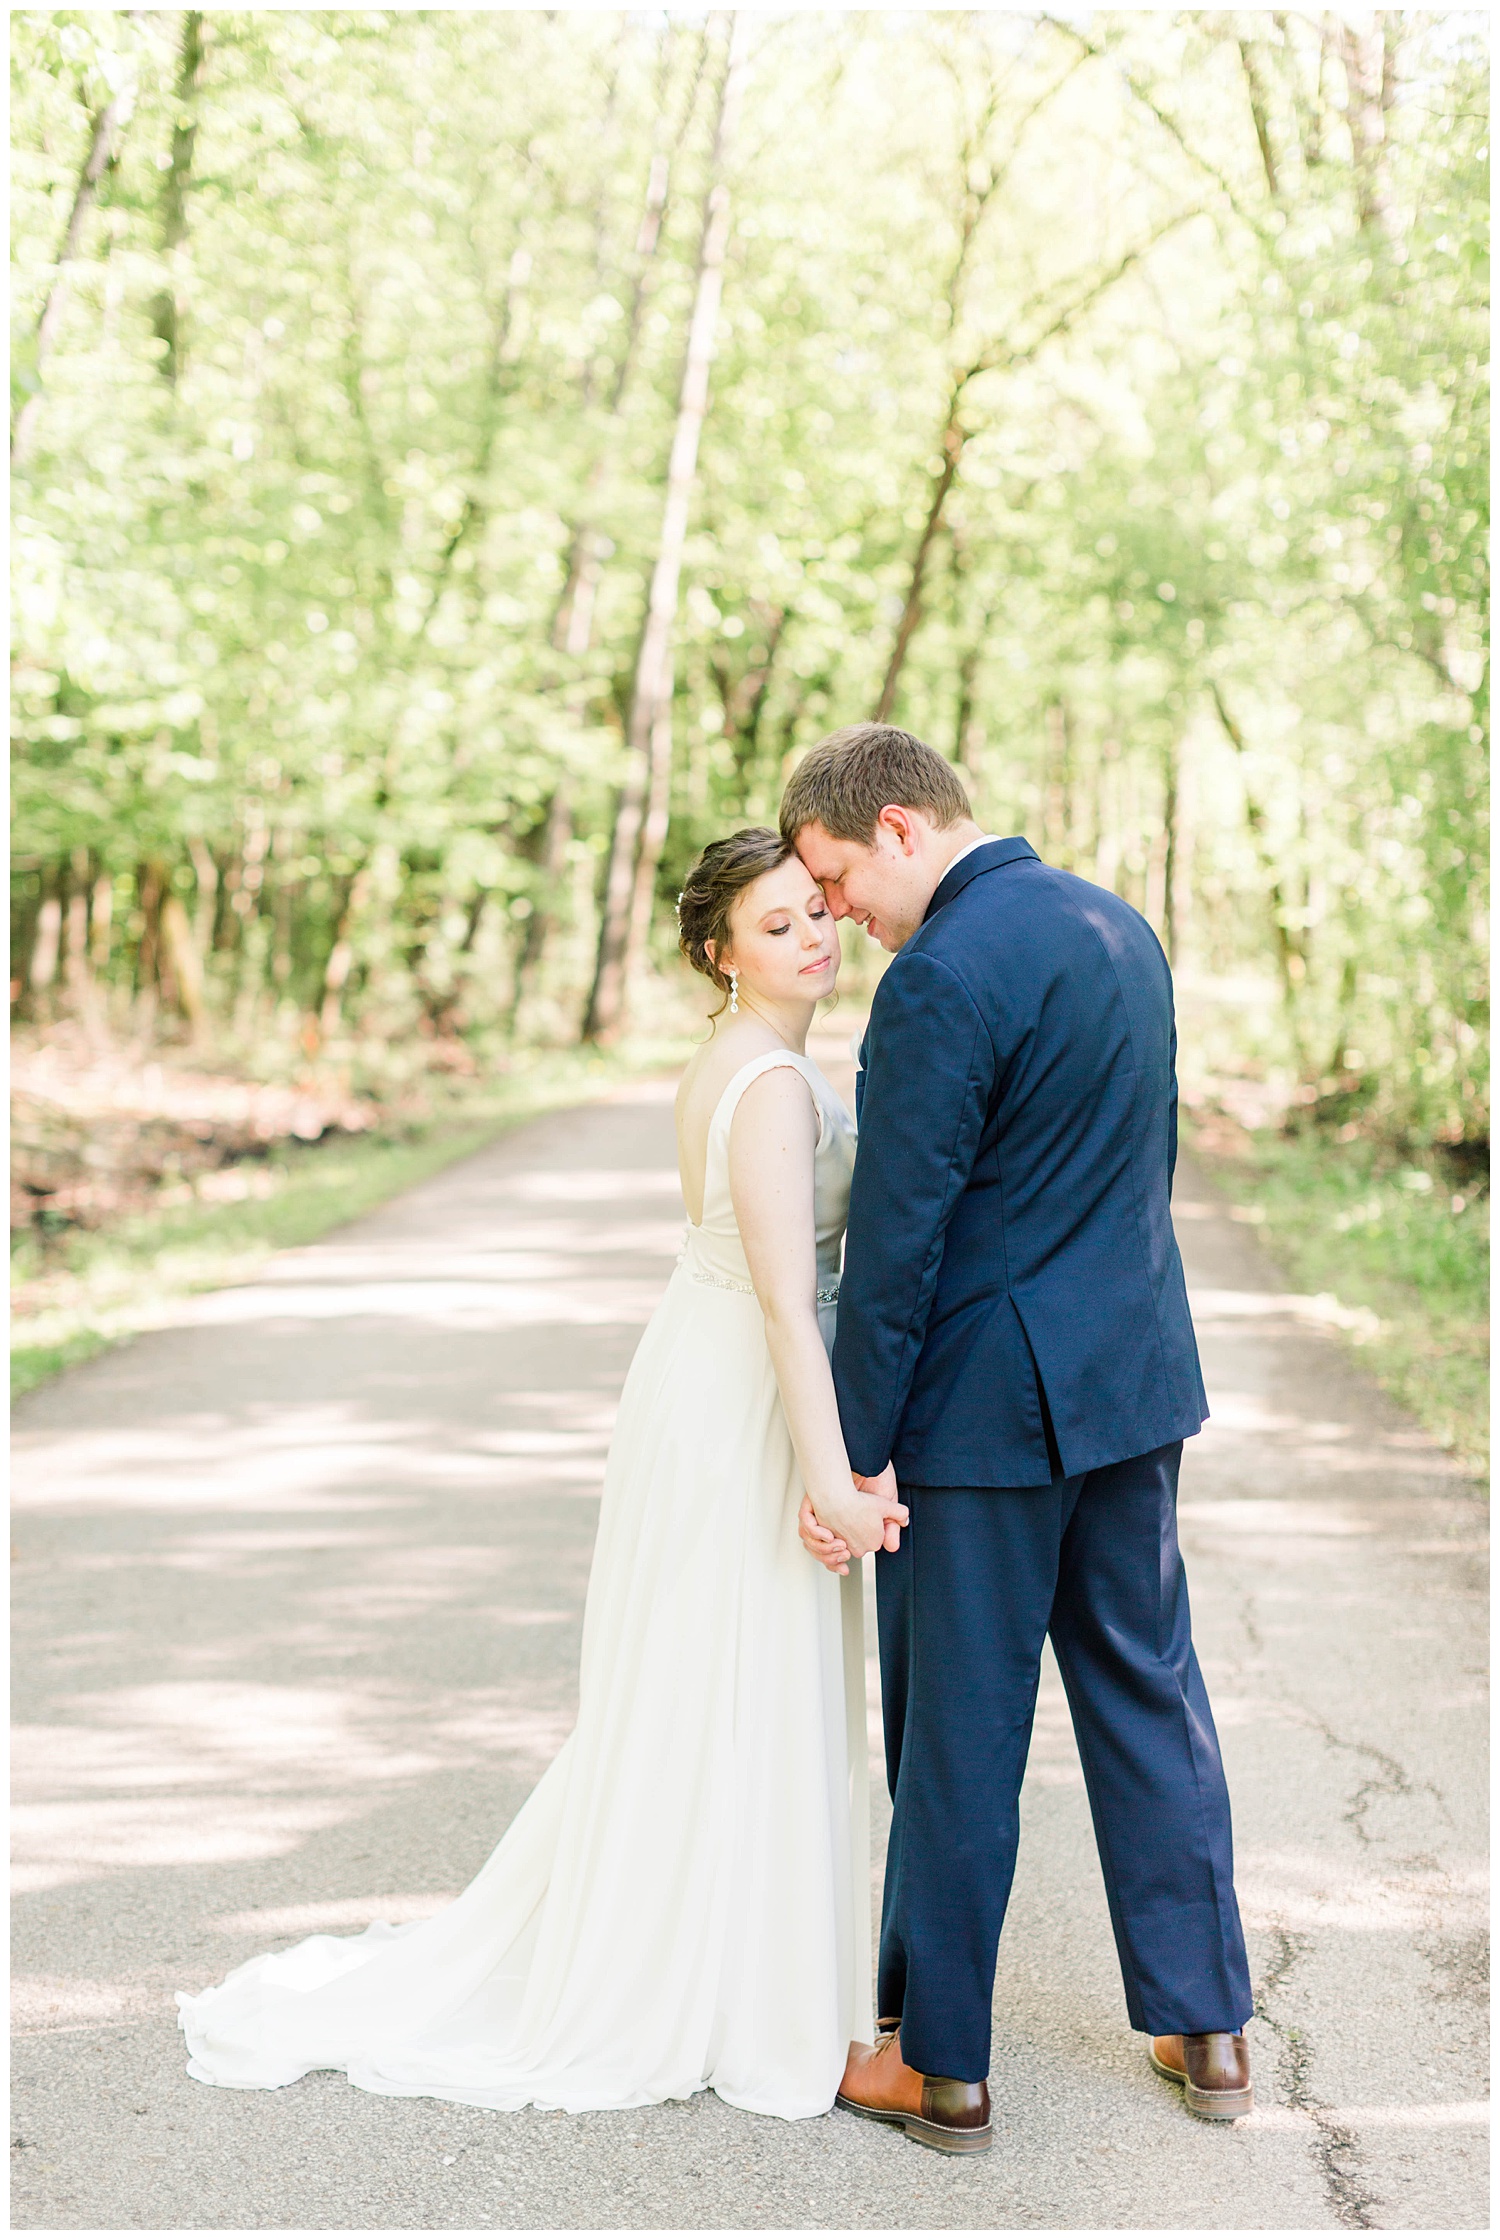 Ryan gently nuzzles his new bride in the middle of a forest pathway | Iowa Wedding Photographer